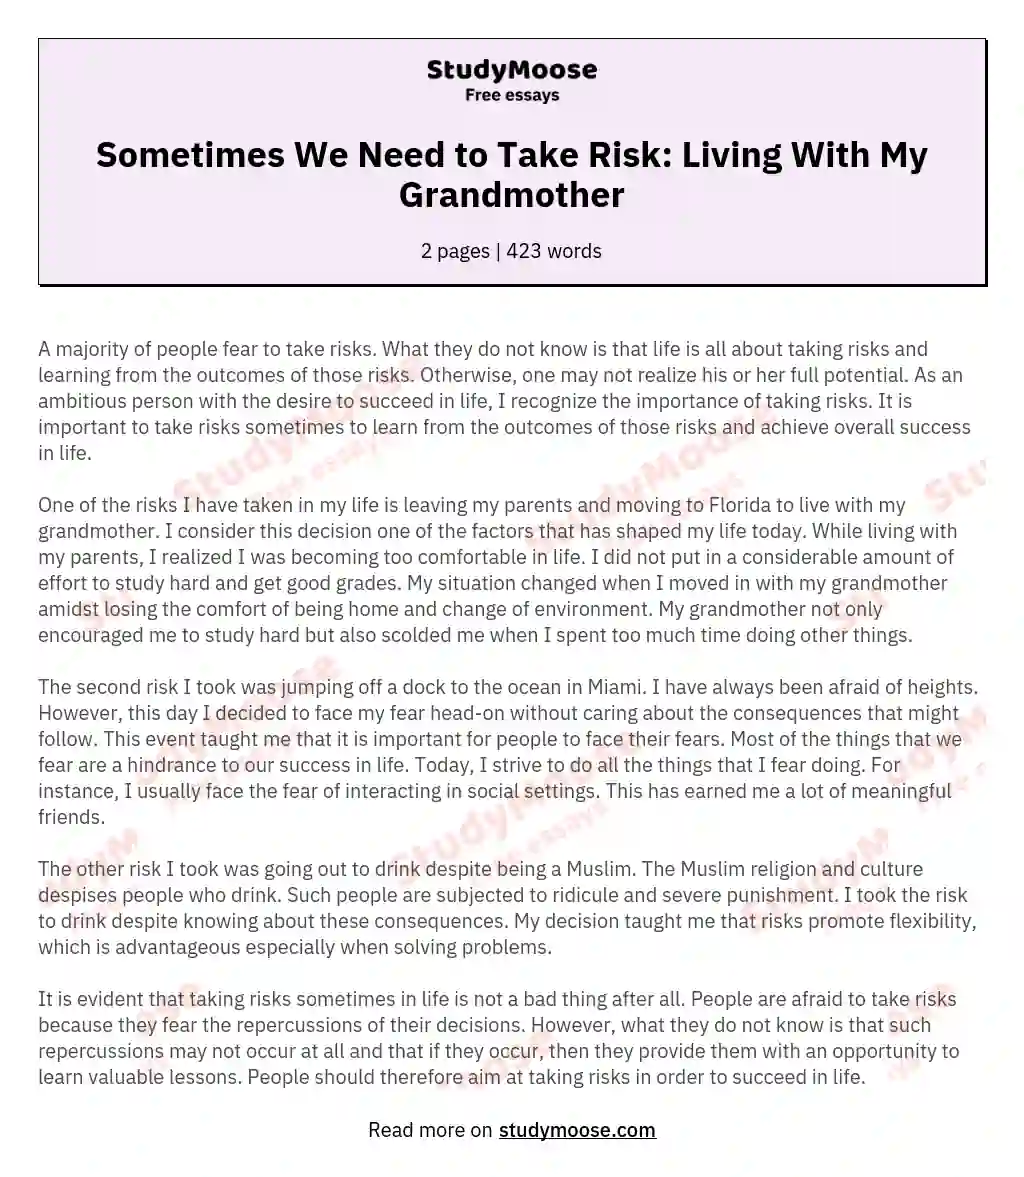 Sometimes We Need to Take Risk: Living With My Grandmother essay